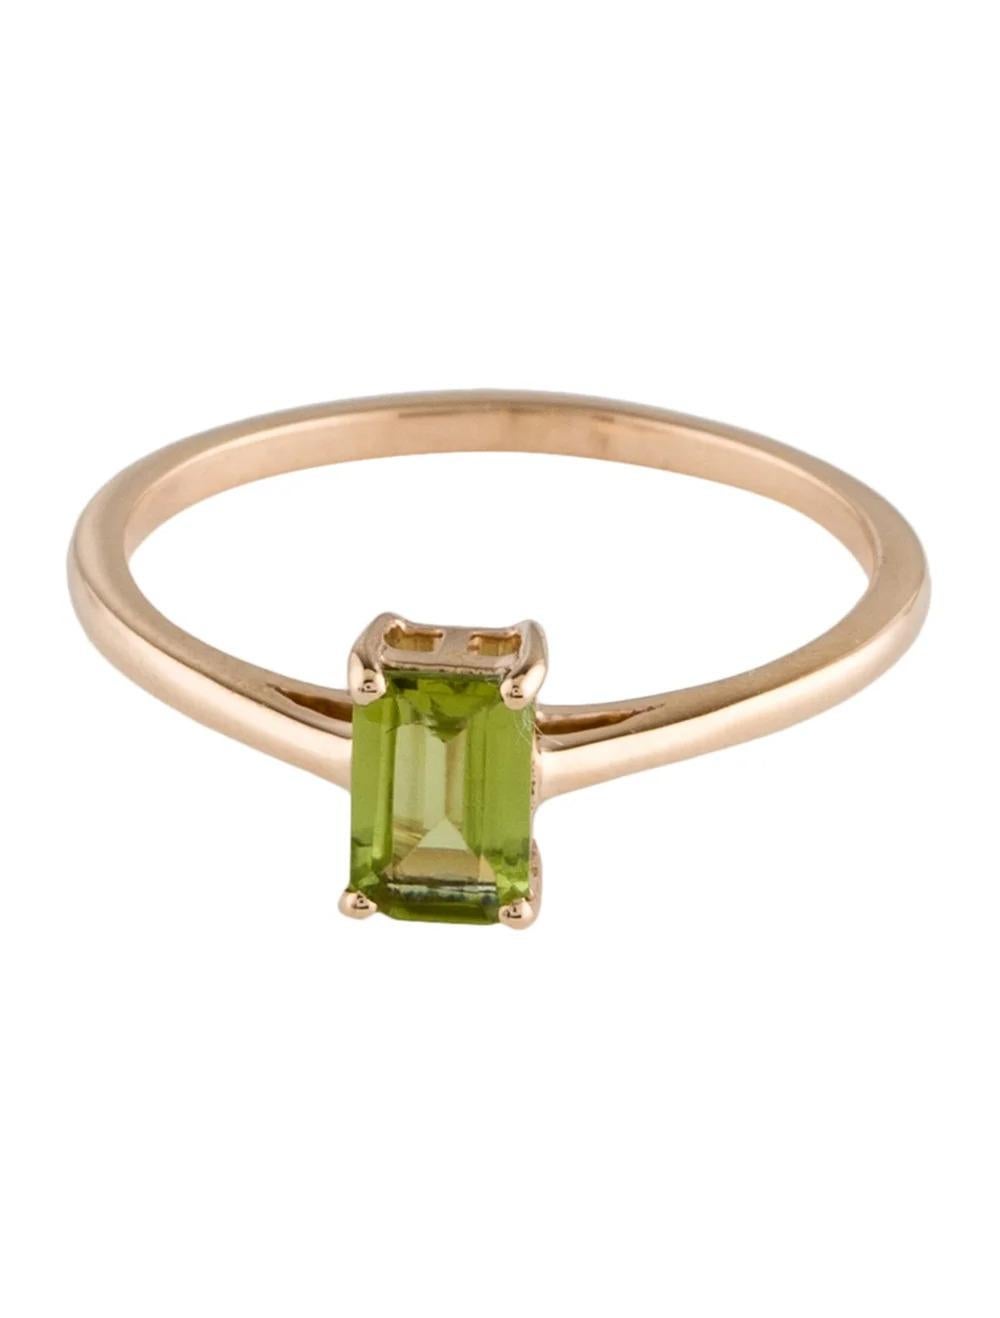 Emerald Cut 14K Peridot Cocktail Ring Size 6.75 - Green Gemstone, Statement Jewelry For Sale